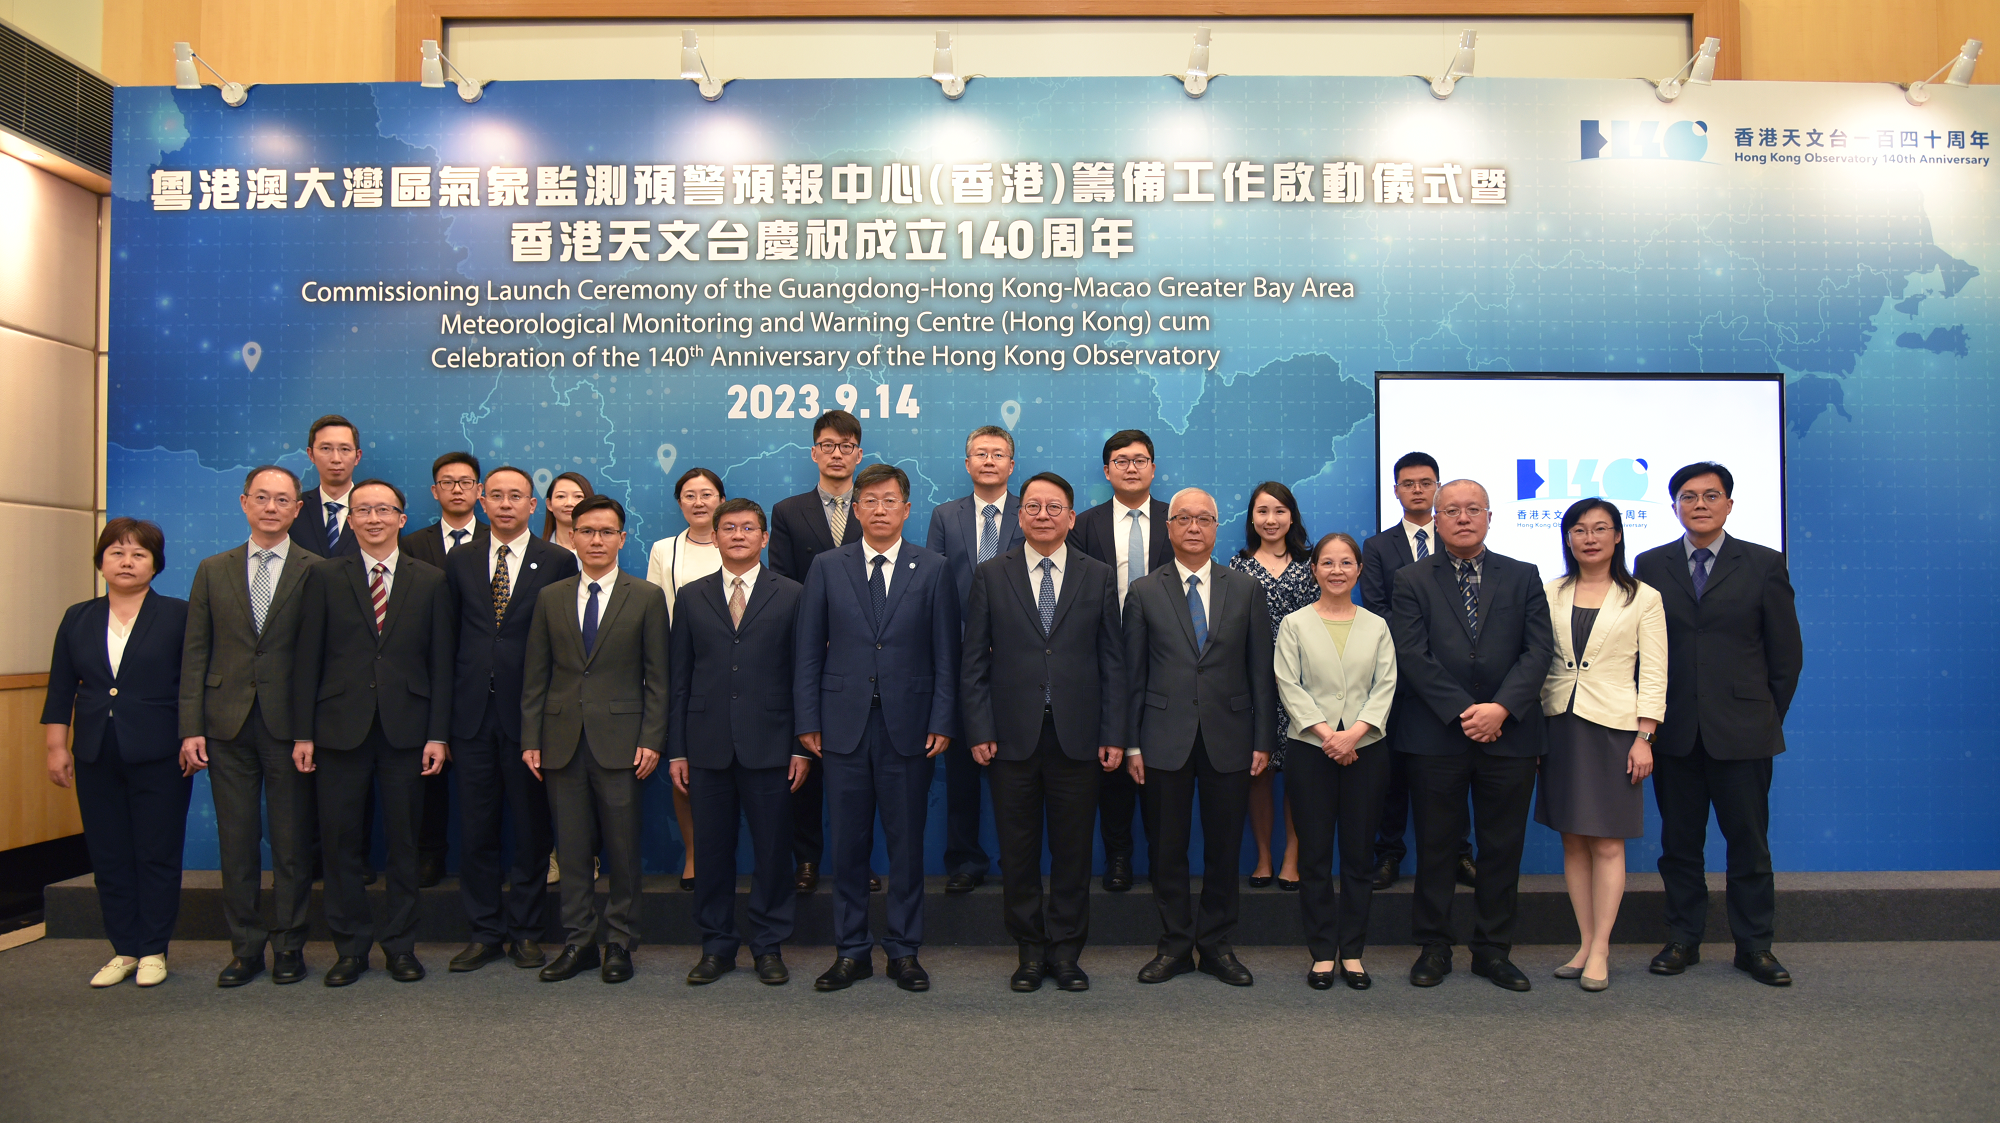 The preparation work for the Guangdong-Hong Kong-Macao Greater Bay Area Meteorological Monitoring and Warning Center (Hong Kong) officially commenced today (September 14). The Chief Secretary for Administration, Mr Chan Kwok-ki (front row, sixth right); the Administrator of the China Meteorological Administration, Dr Chen Zhenlin (front row, seventh right); the Secretary for Environment and Ecology, Mr Tse Chin-wan (front row, fifth right); the Director of the Guangdong Meteorological Service, Mr Zhuang Xudong (front row, sixth left); the Director of Macao Meteorological and Geophysical Bureau, Mr Leong Weng-kun (front row, fifth left); the Under Secretary for Environment and Ecology, Miss Diane Wong (front row, fourth right); and the Director of the Hong Kong Observatory, Dr Chan Pak-wai (front row, third right), took a group photo with guests at the commissioning launch ceremony.